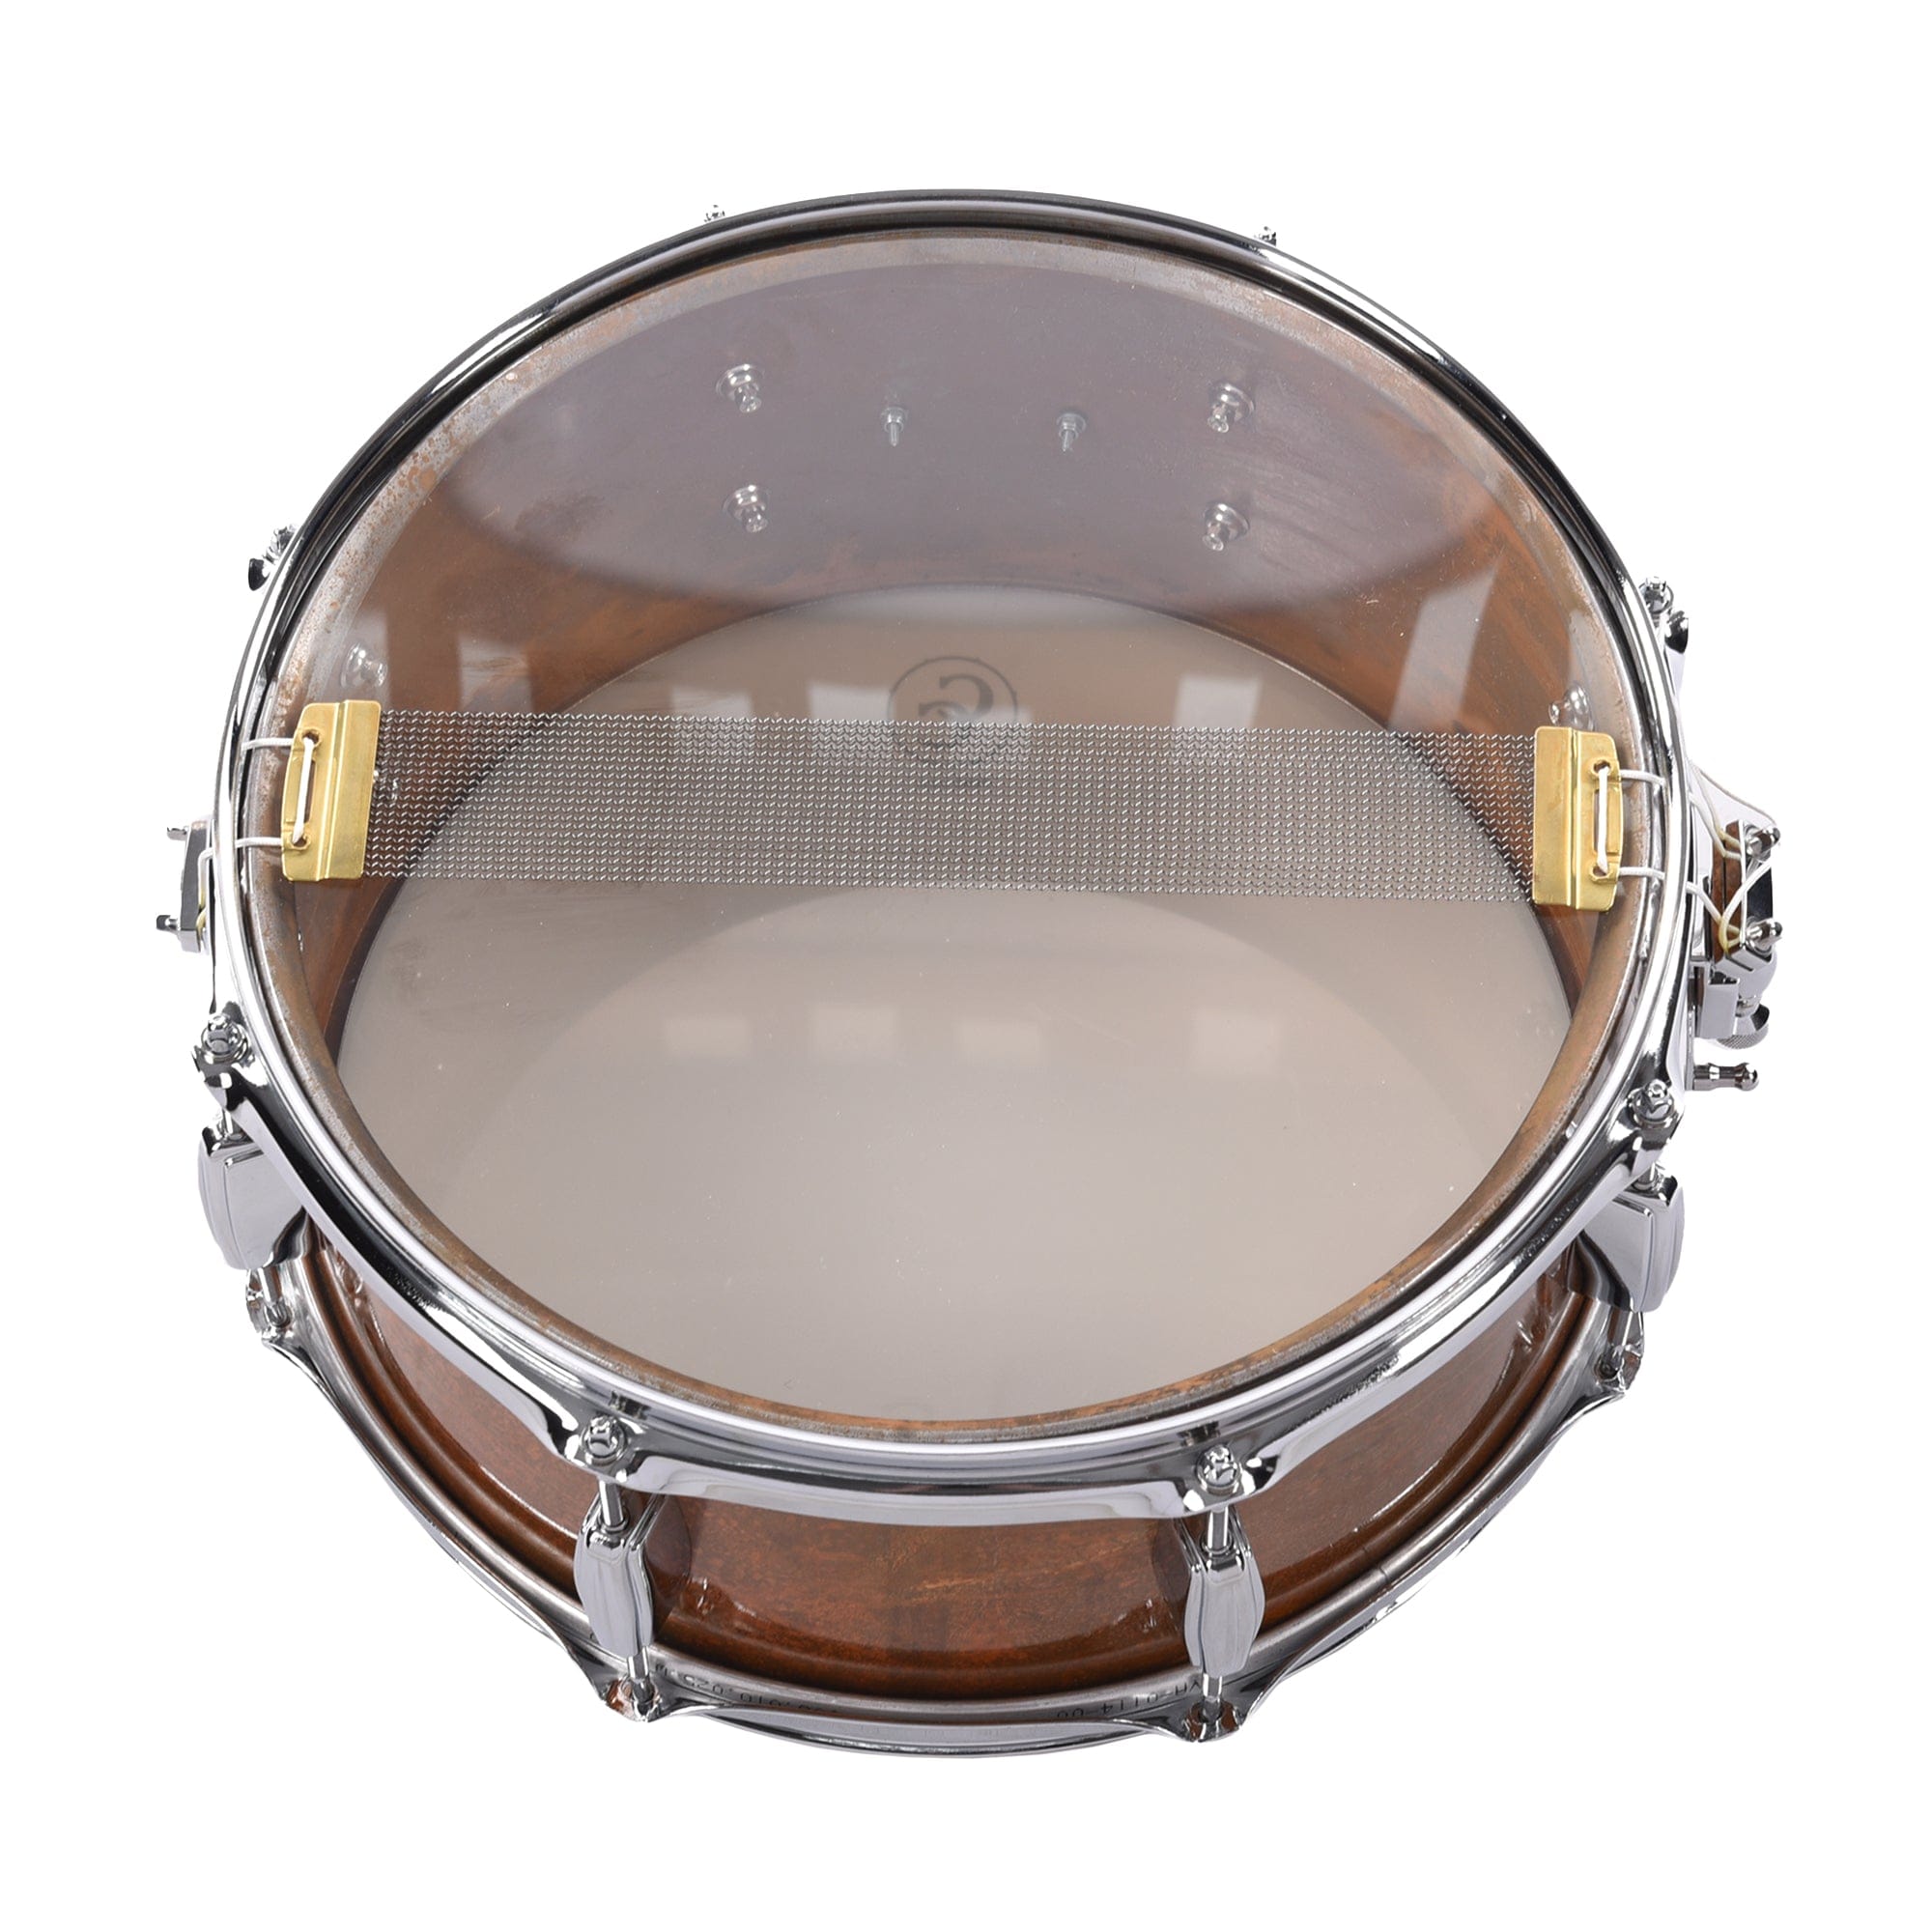 C&C 6.5x14 Custom Splattered Copper Over Steel Snare Drum Drums and Percussion / Acoustic Drums / Snare